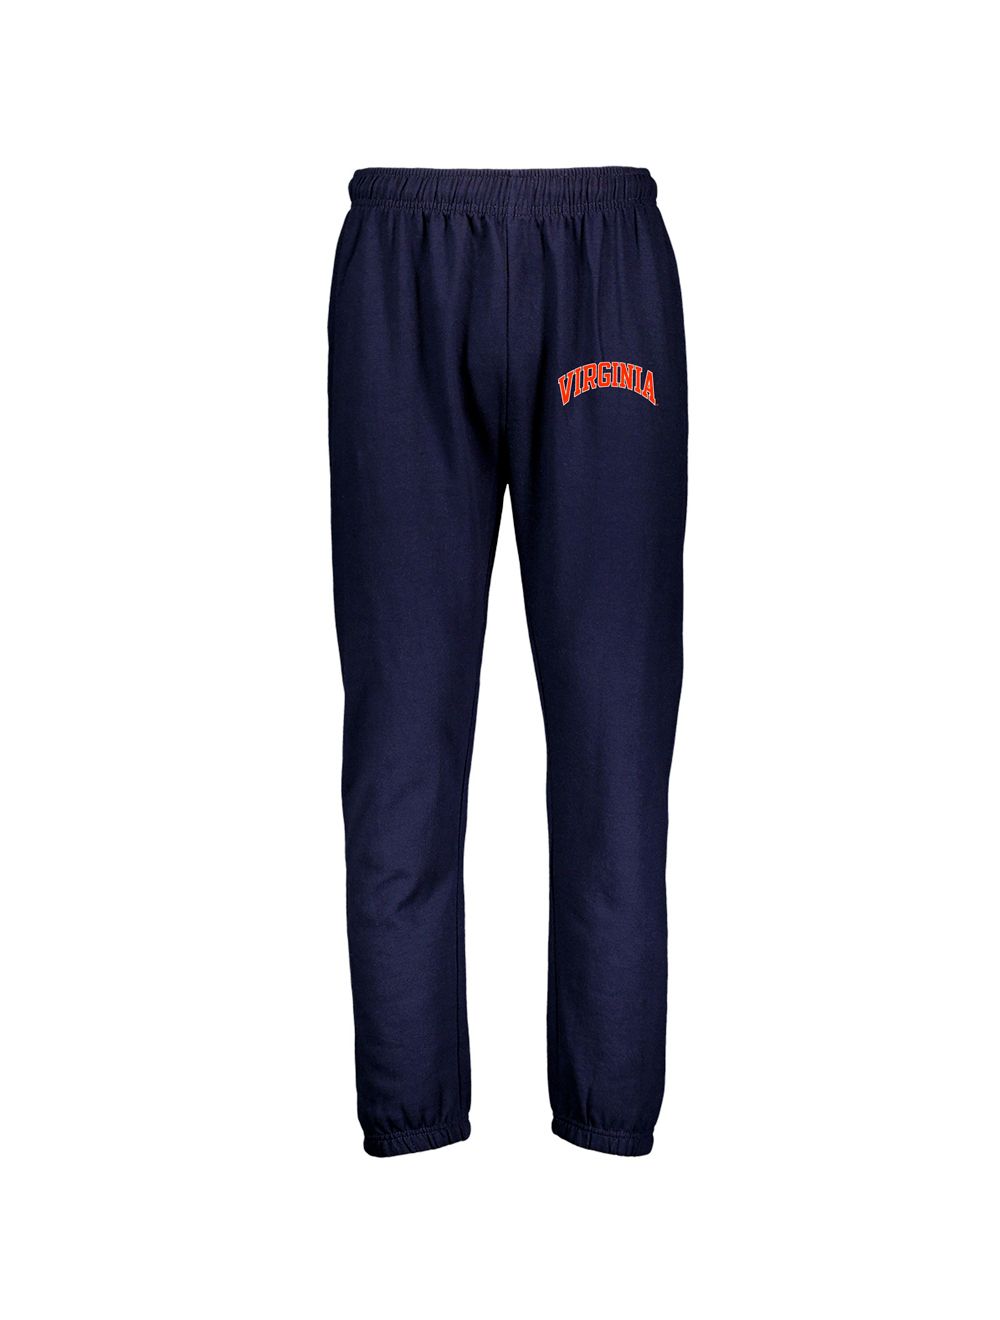 Navy Sweatpants - Mincer's of Charlottesville